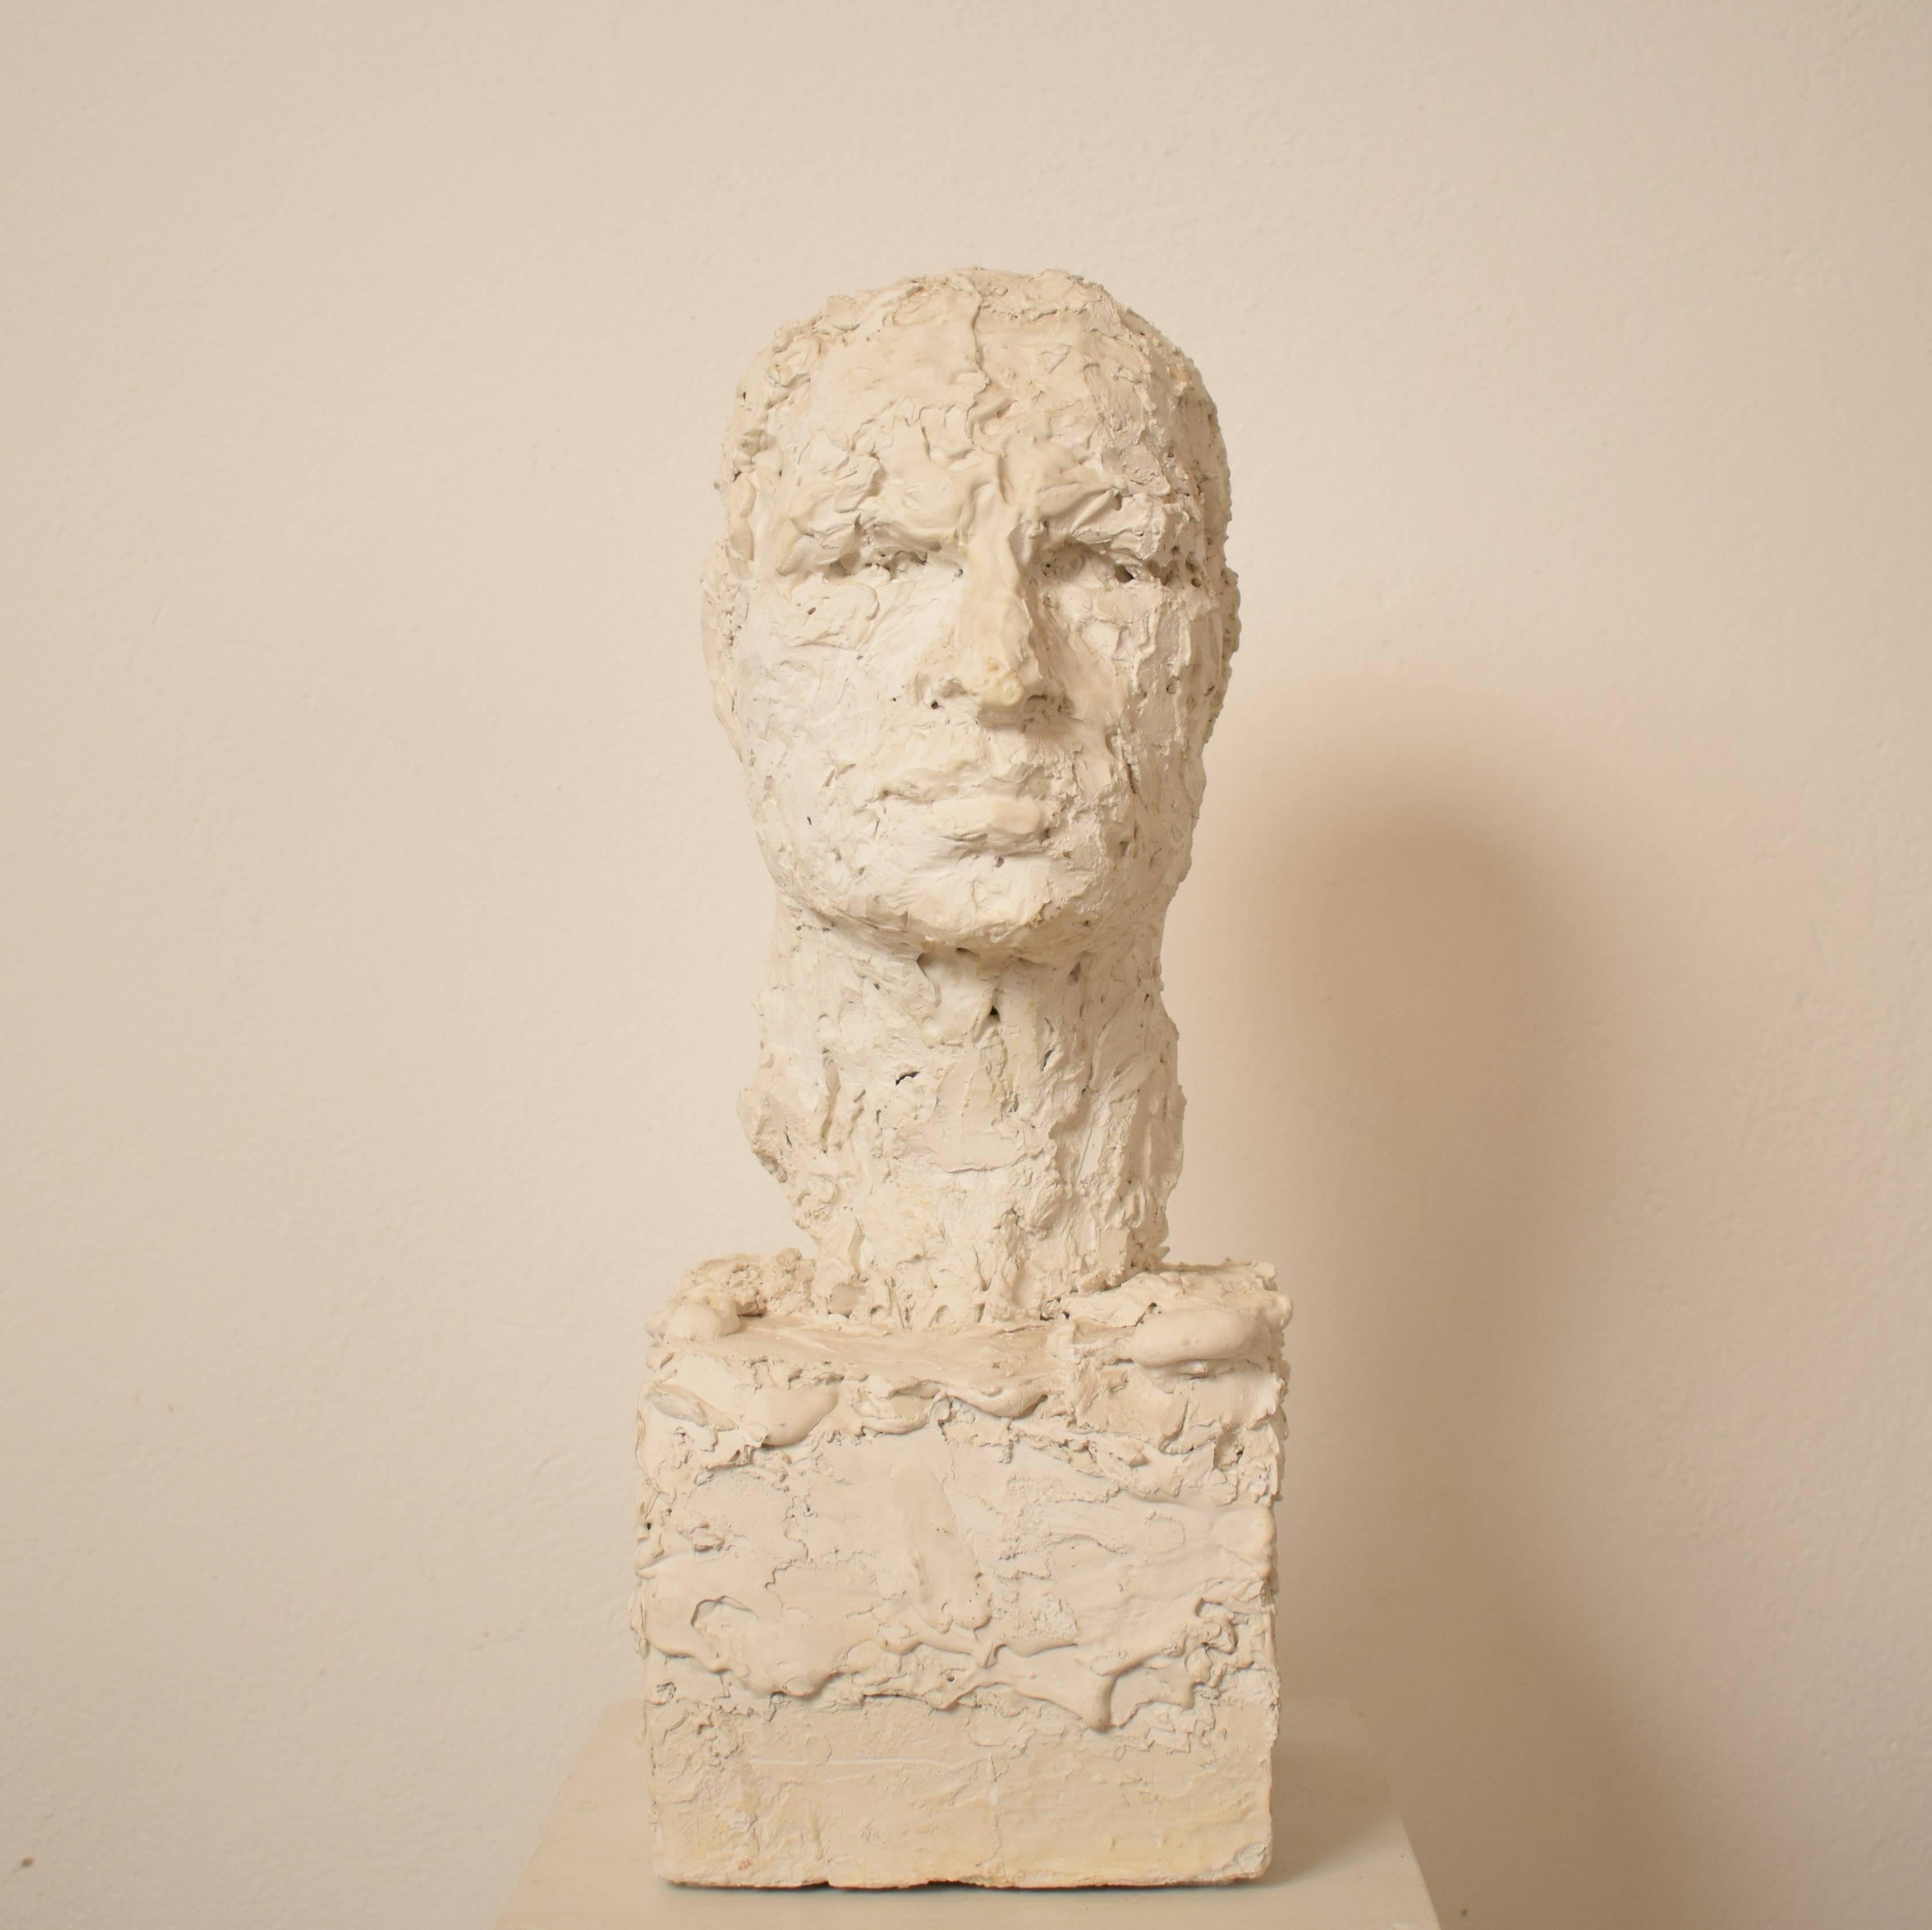 This plaster bust of was made in the early 20th century. It was probably made by Karl Koch in 1920.